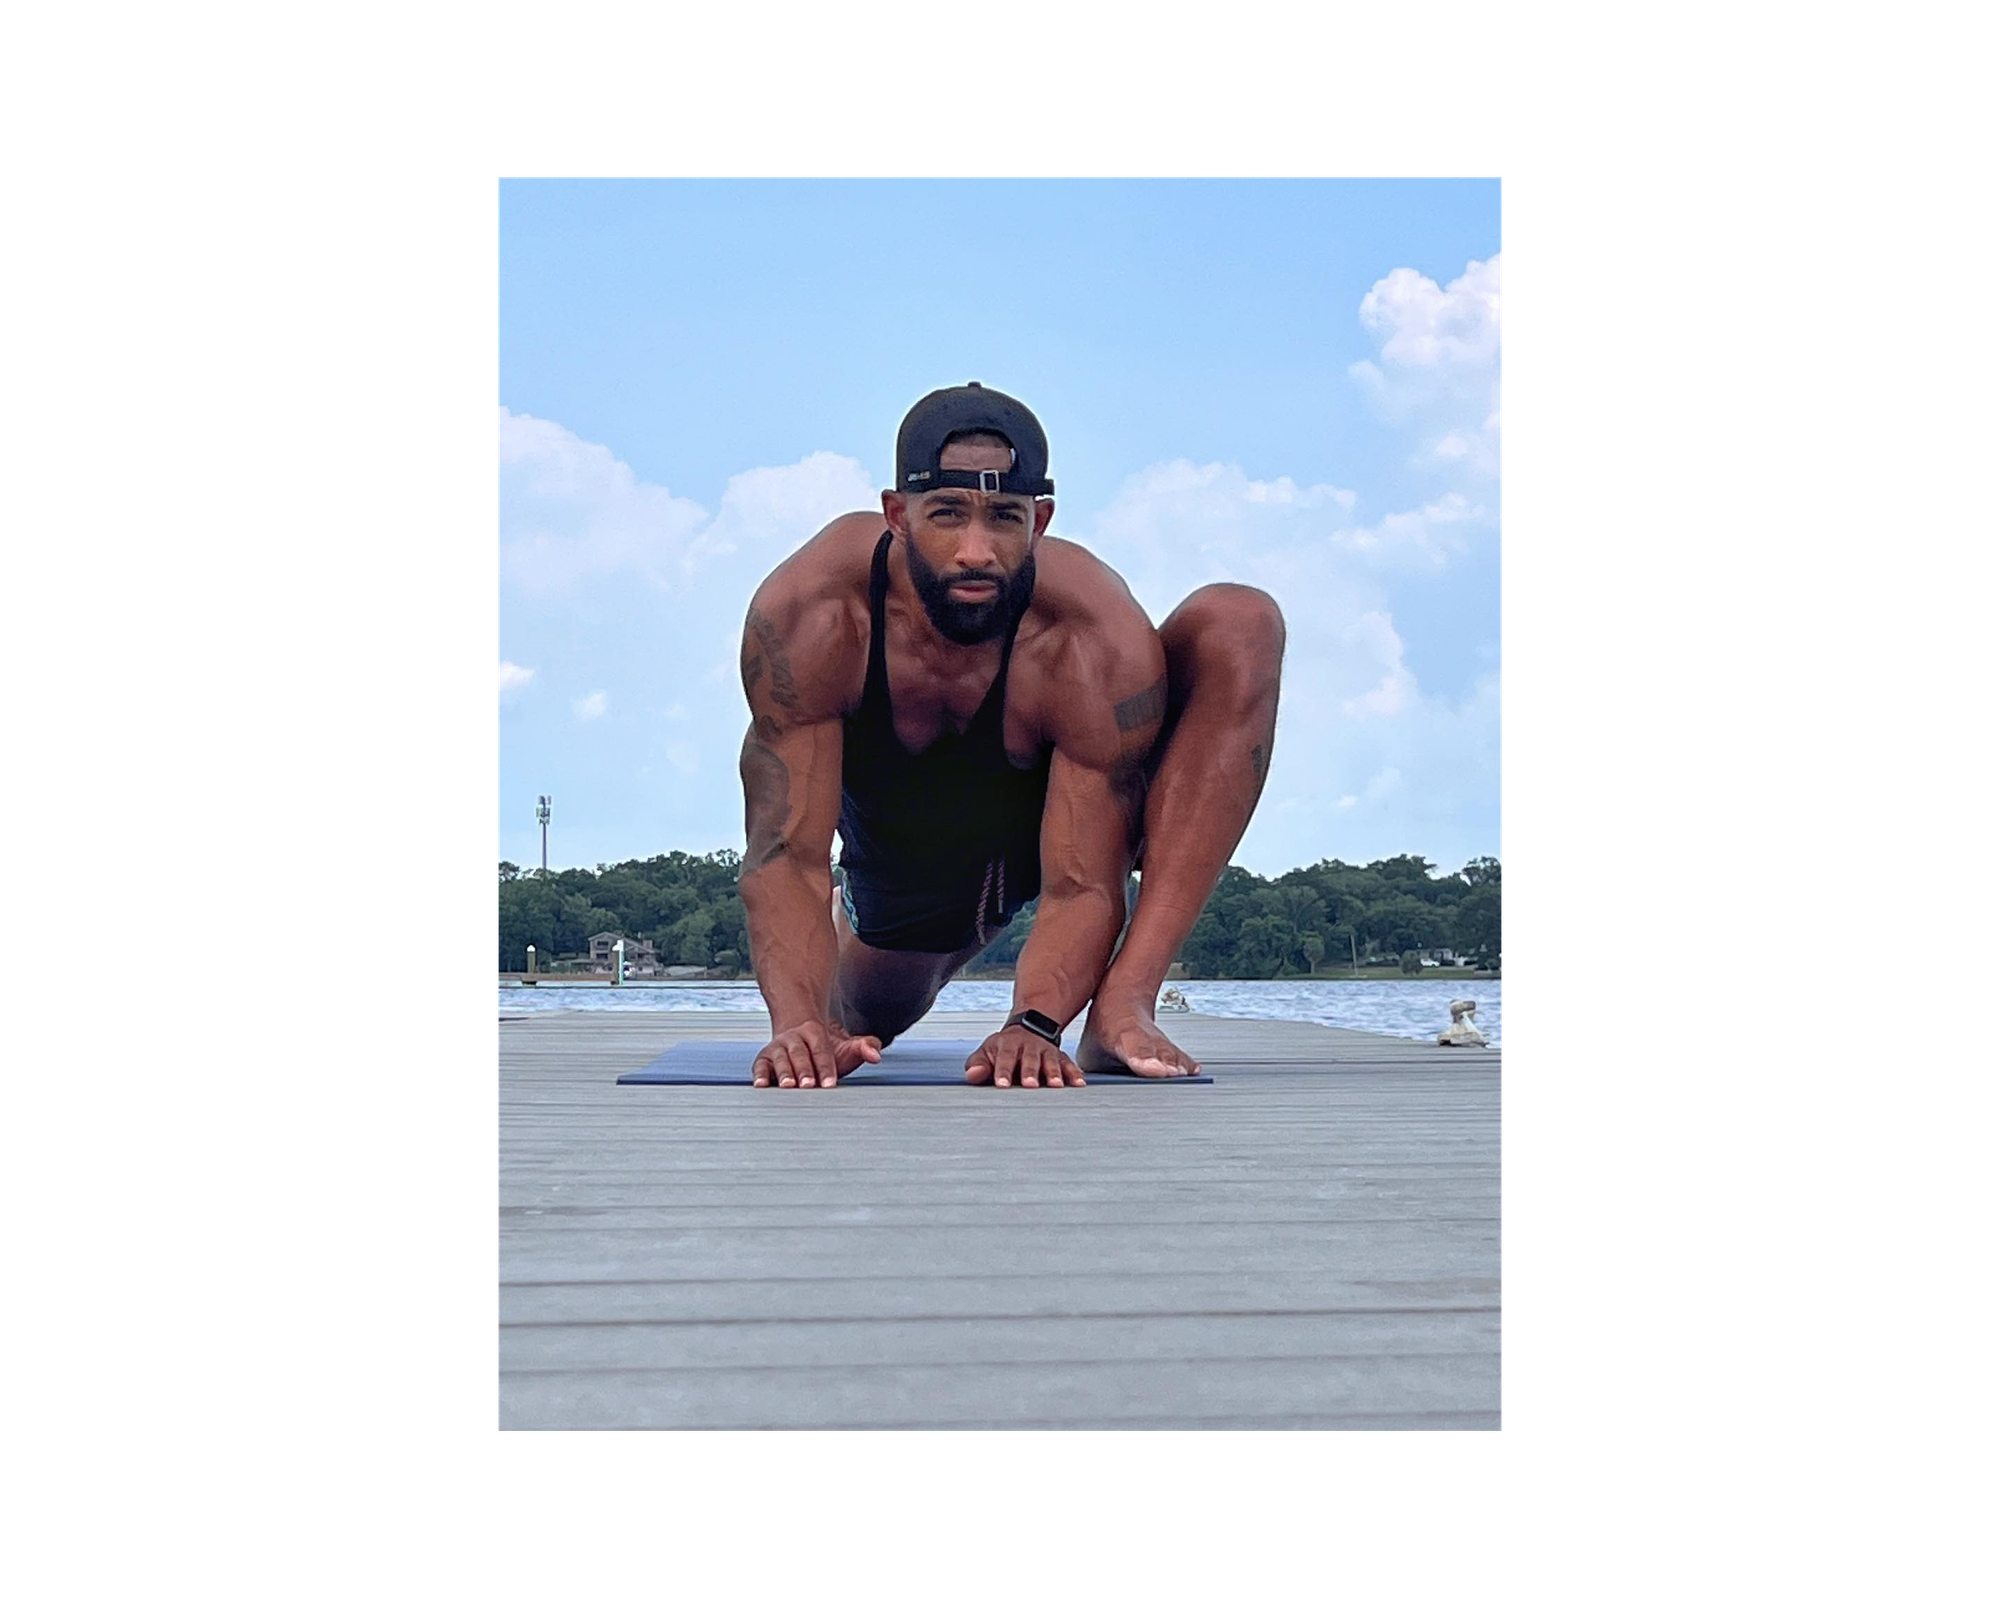 Empowering Fitness Journeys: The Robert "Brix" Glover Story